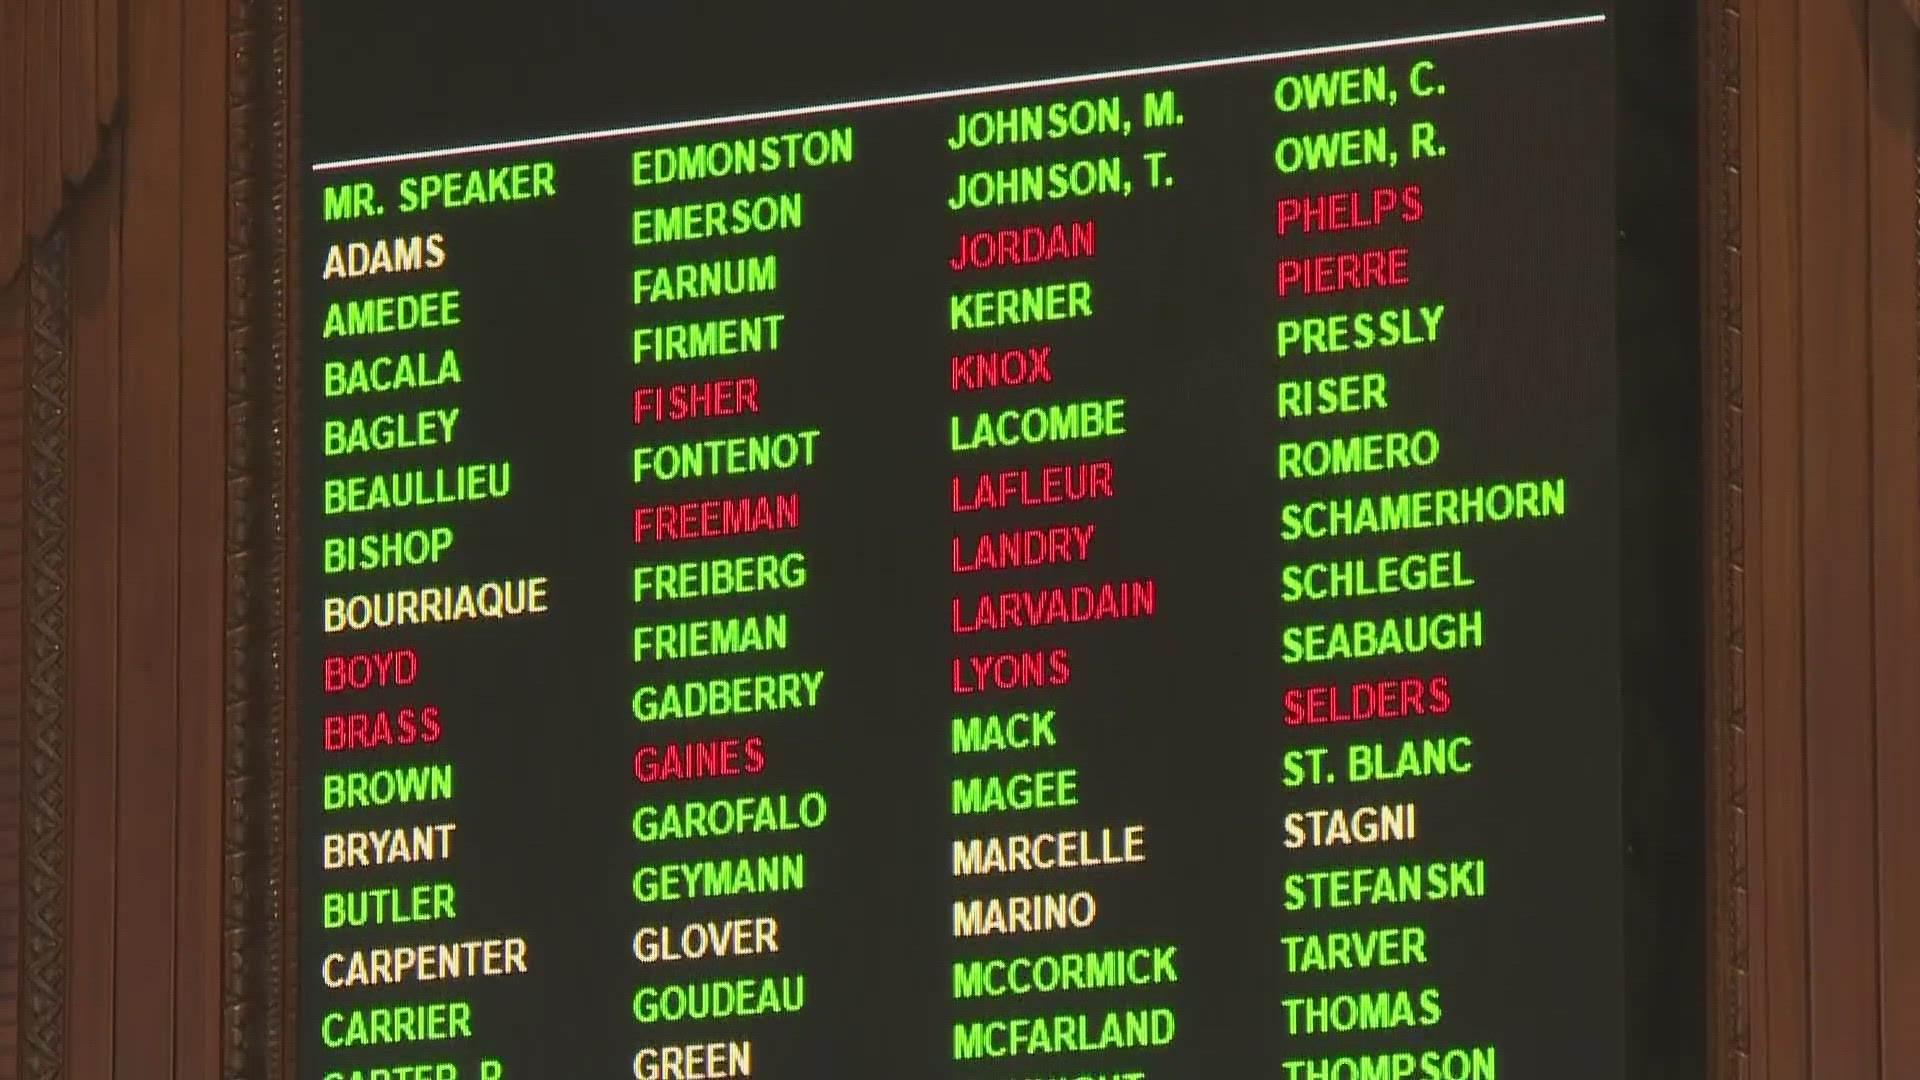 The bill to ban gender-affirming care for minors was passed over the governor's veto. Two other LGBTQ bill vetoes were not overridden.